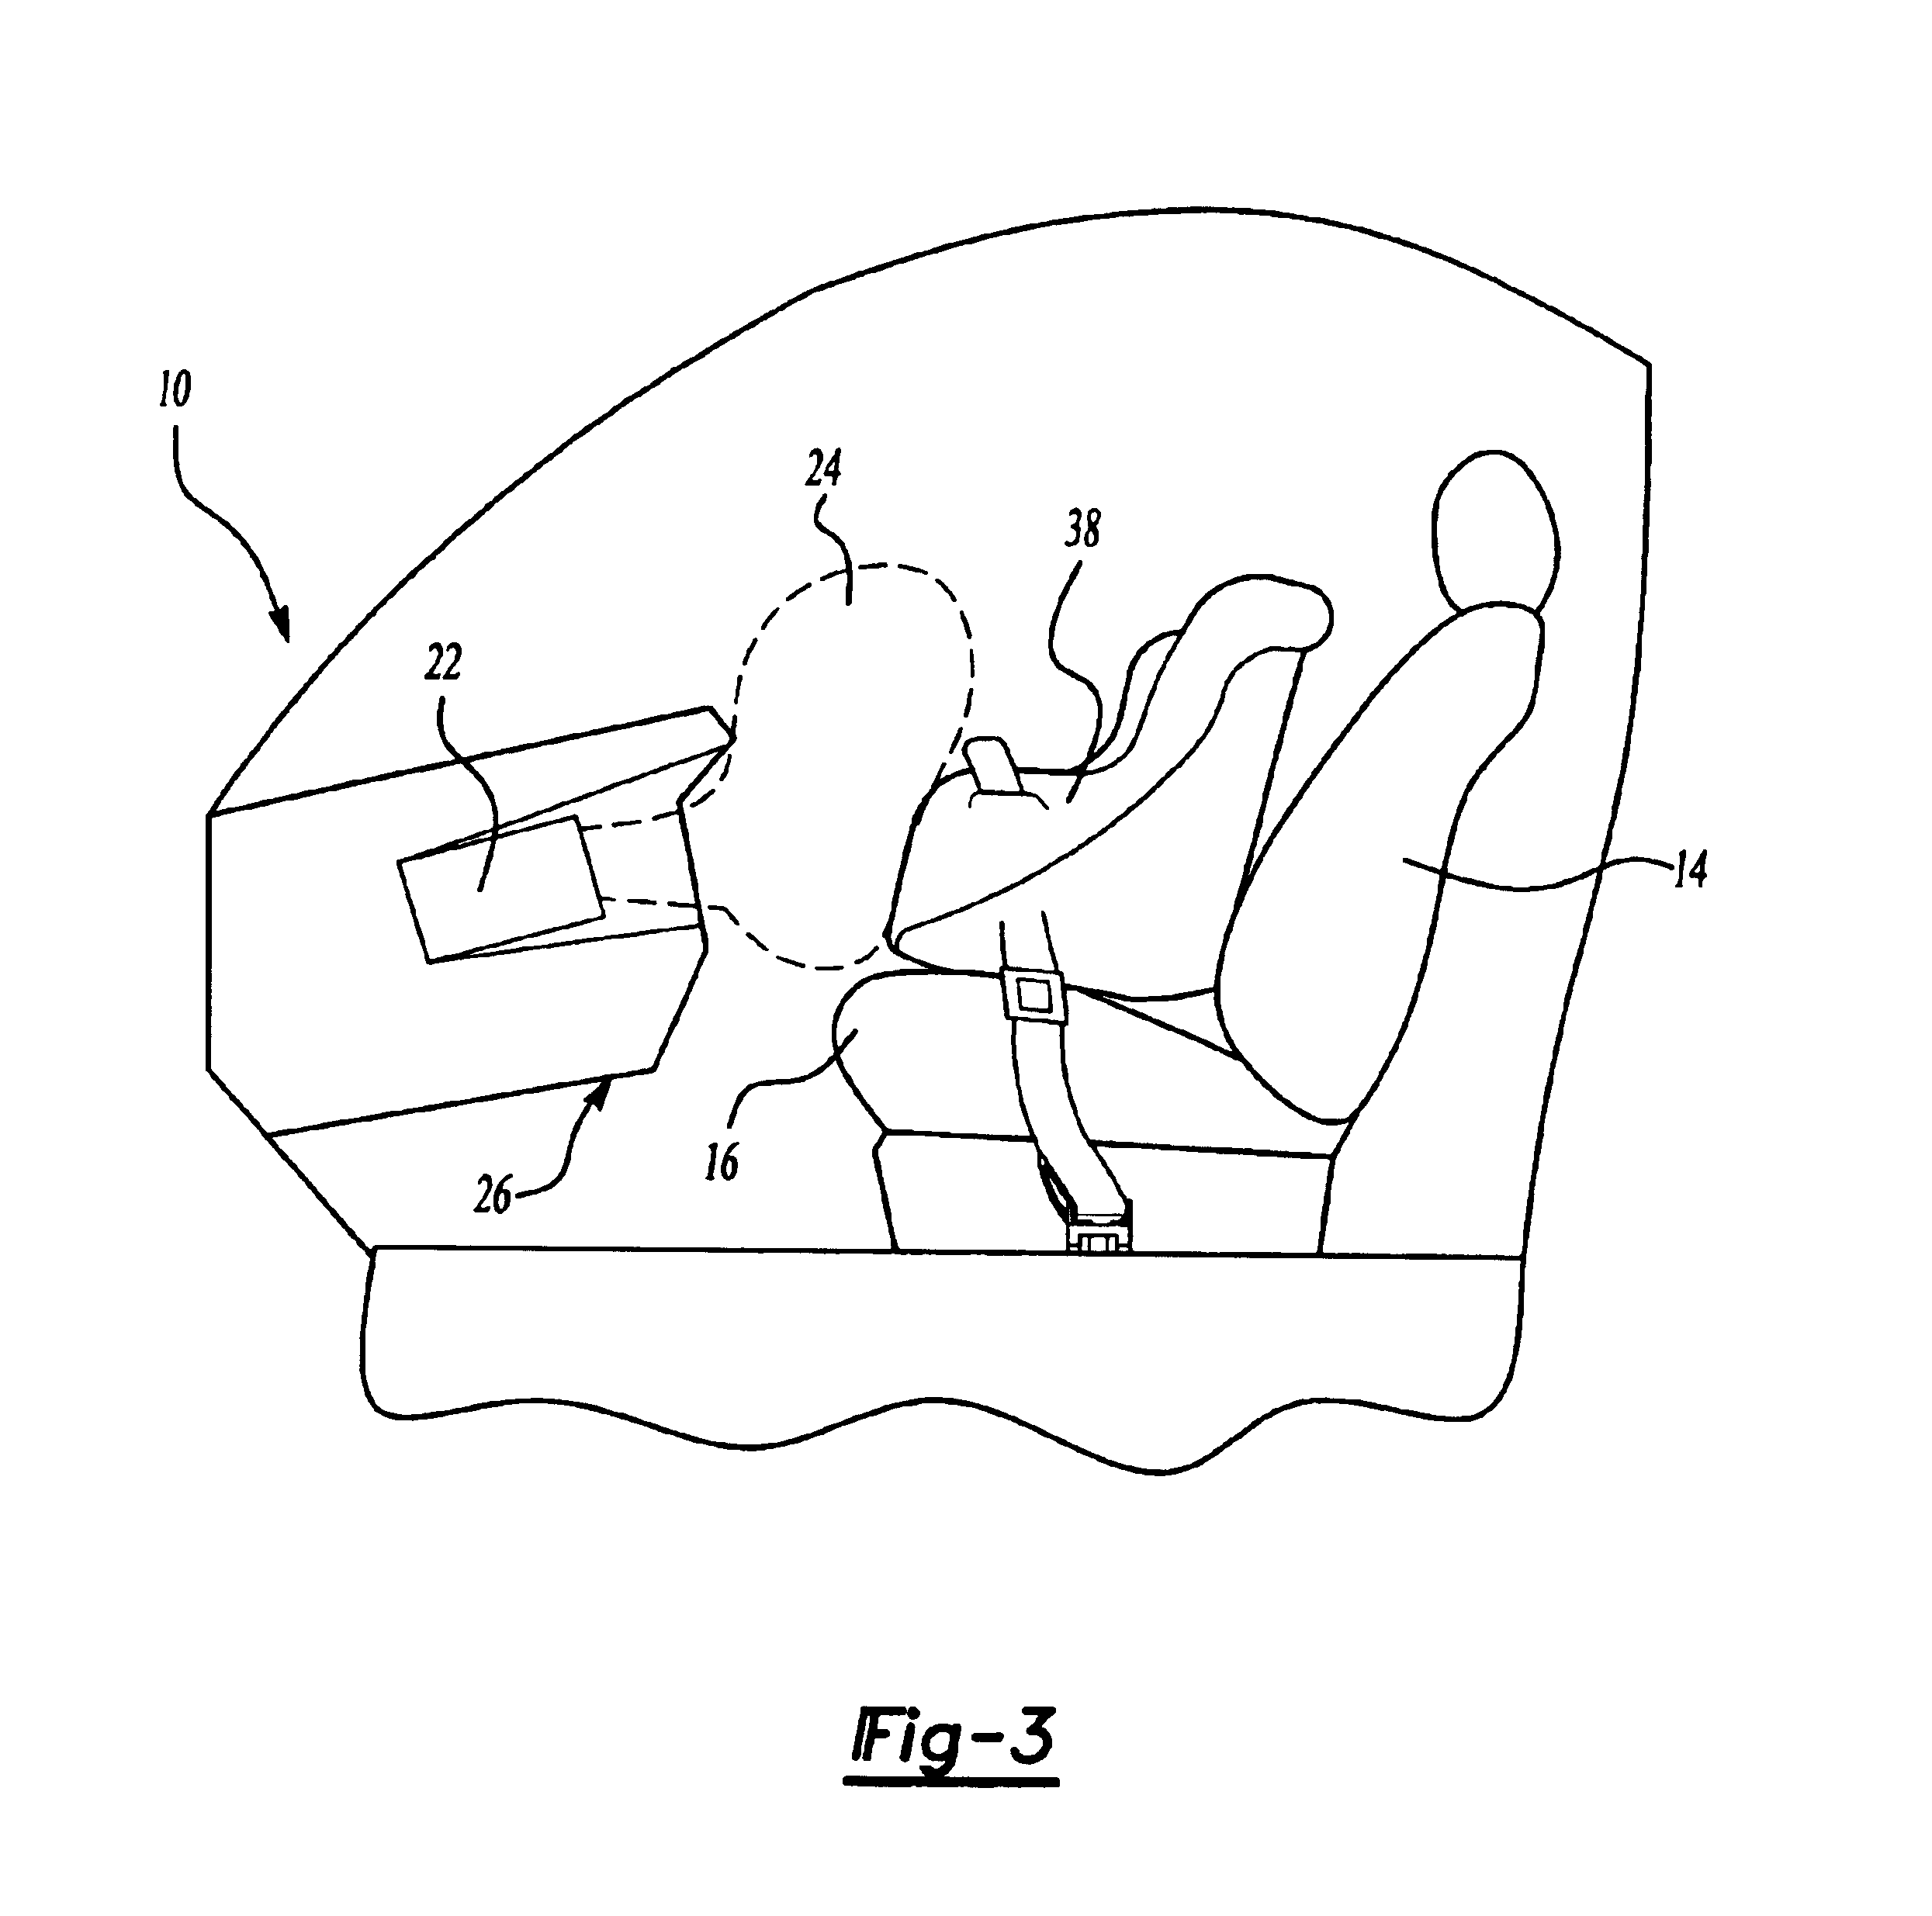 Controller for occupant restraint system